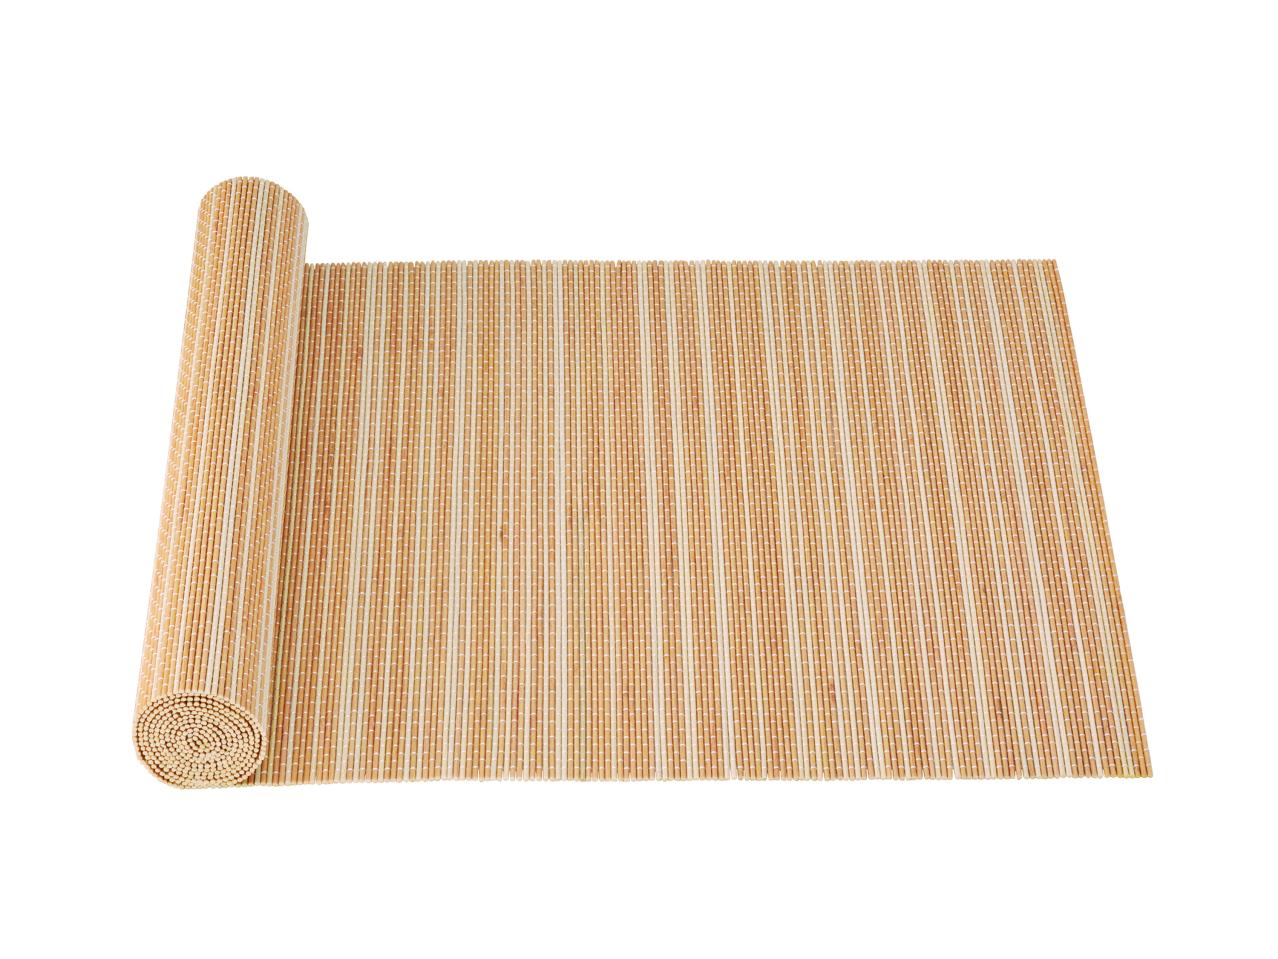 Meradiso Bamboo Table Runner or Placemats 1